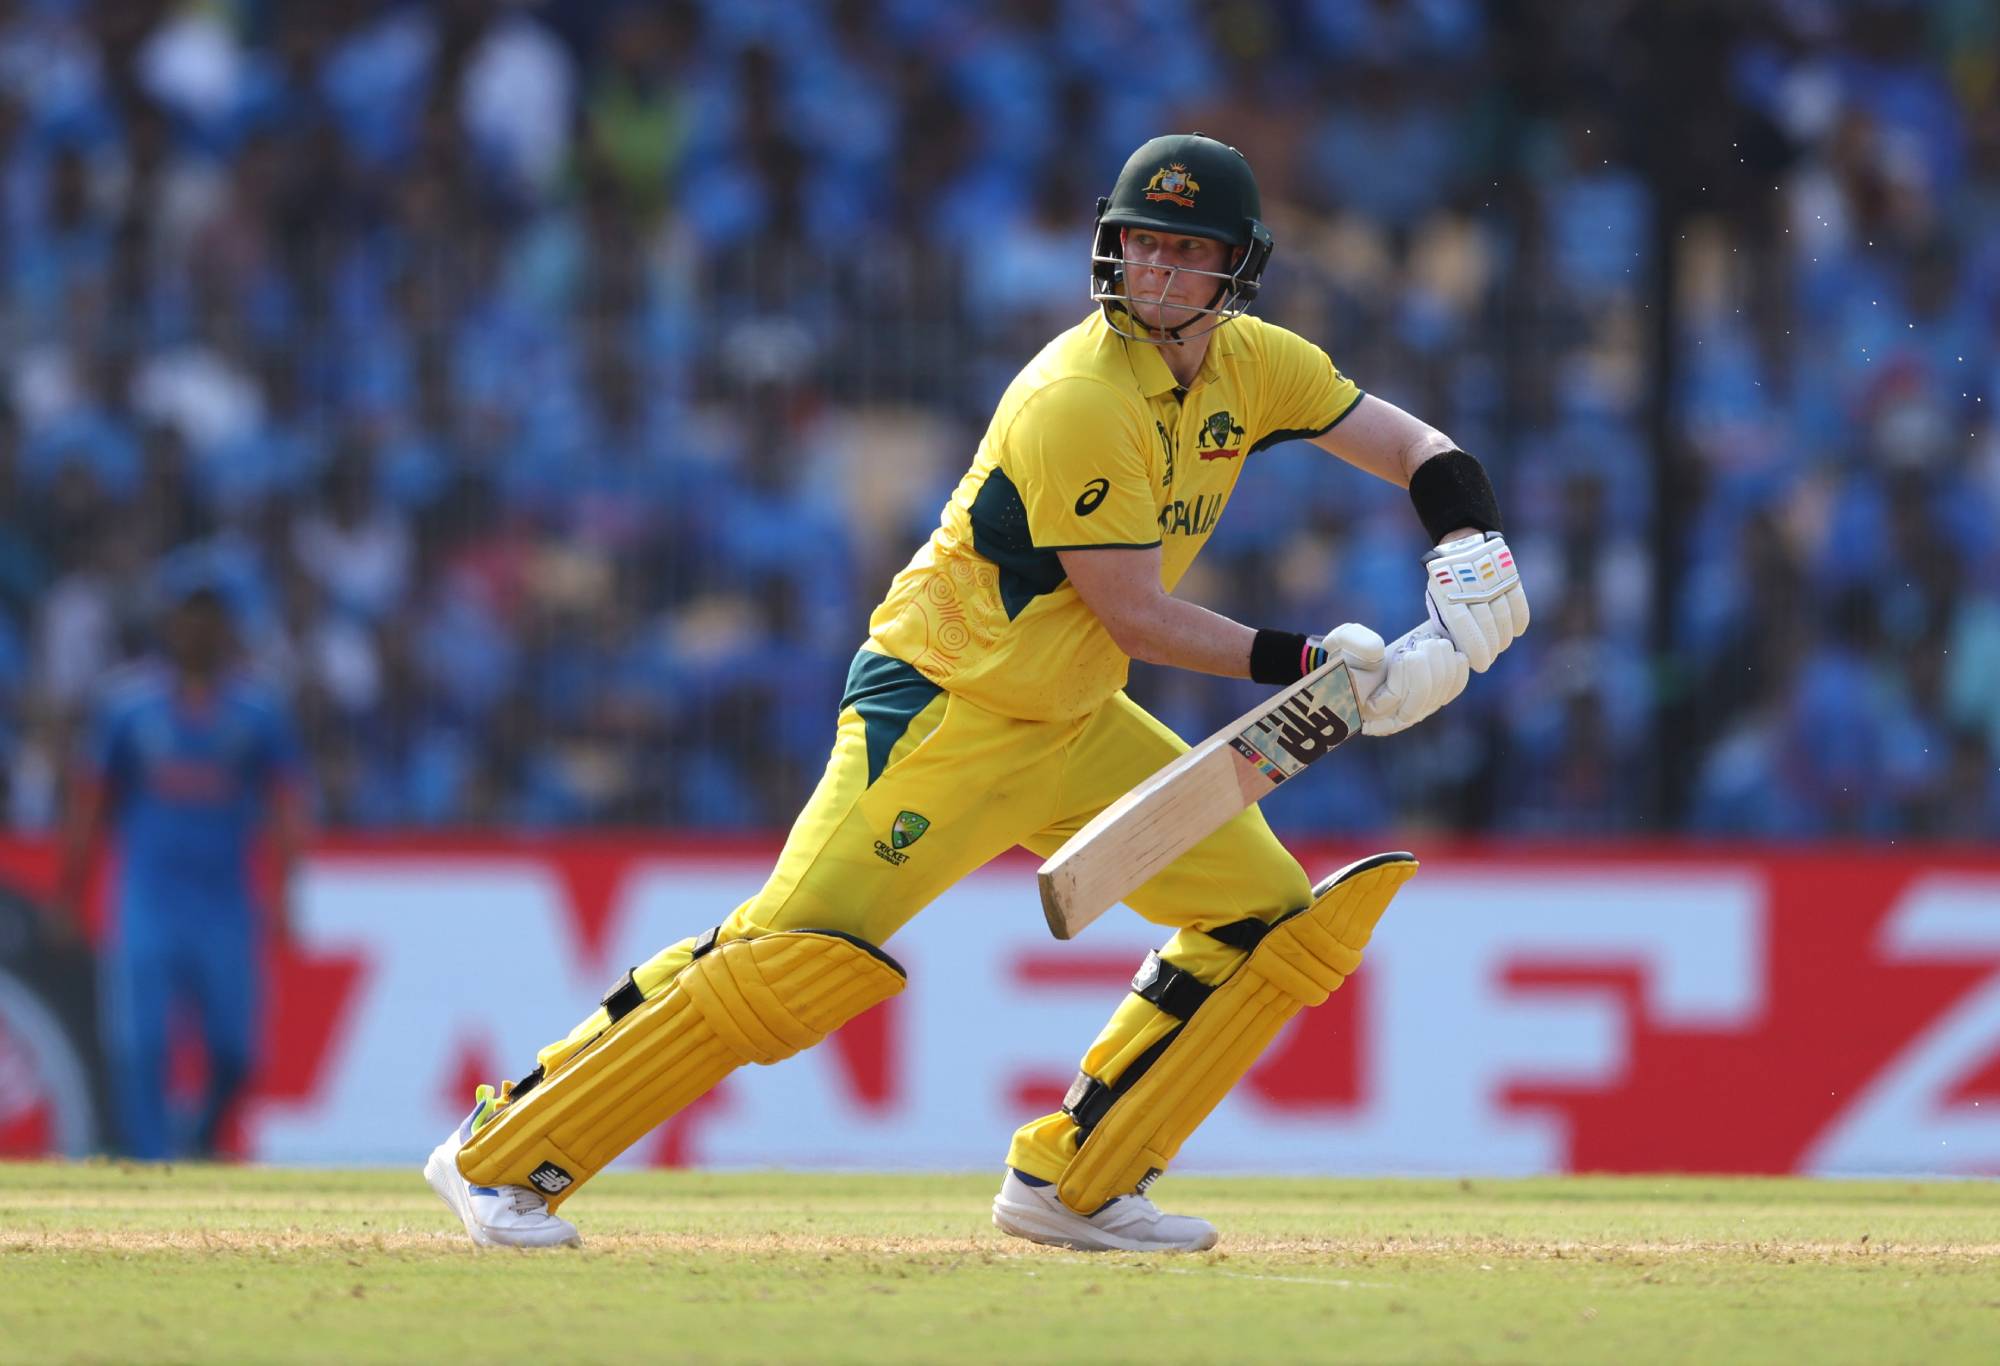 CHENNAI, INDIA - OCTOBER 08: Steve Smith of Australia bats during the ICC Men's Cricket World Cup India 2023 between India and Australia at MA Chidambaram Stadium on October 08, 2023 in Chennai, India. (Photo by Matthew Lewis-ICC/ICC via Getty Images)